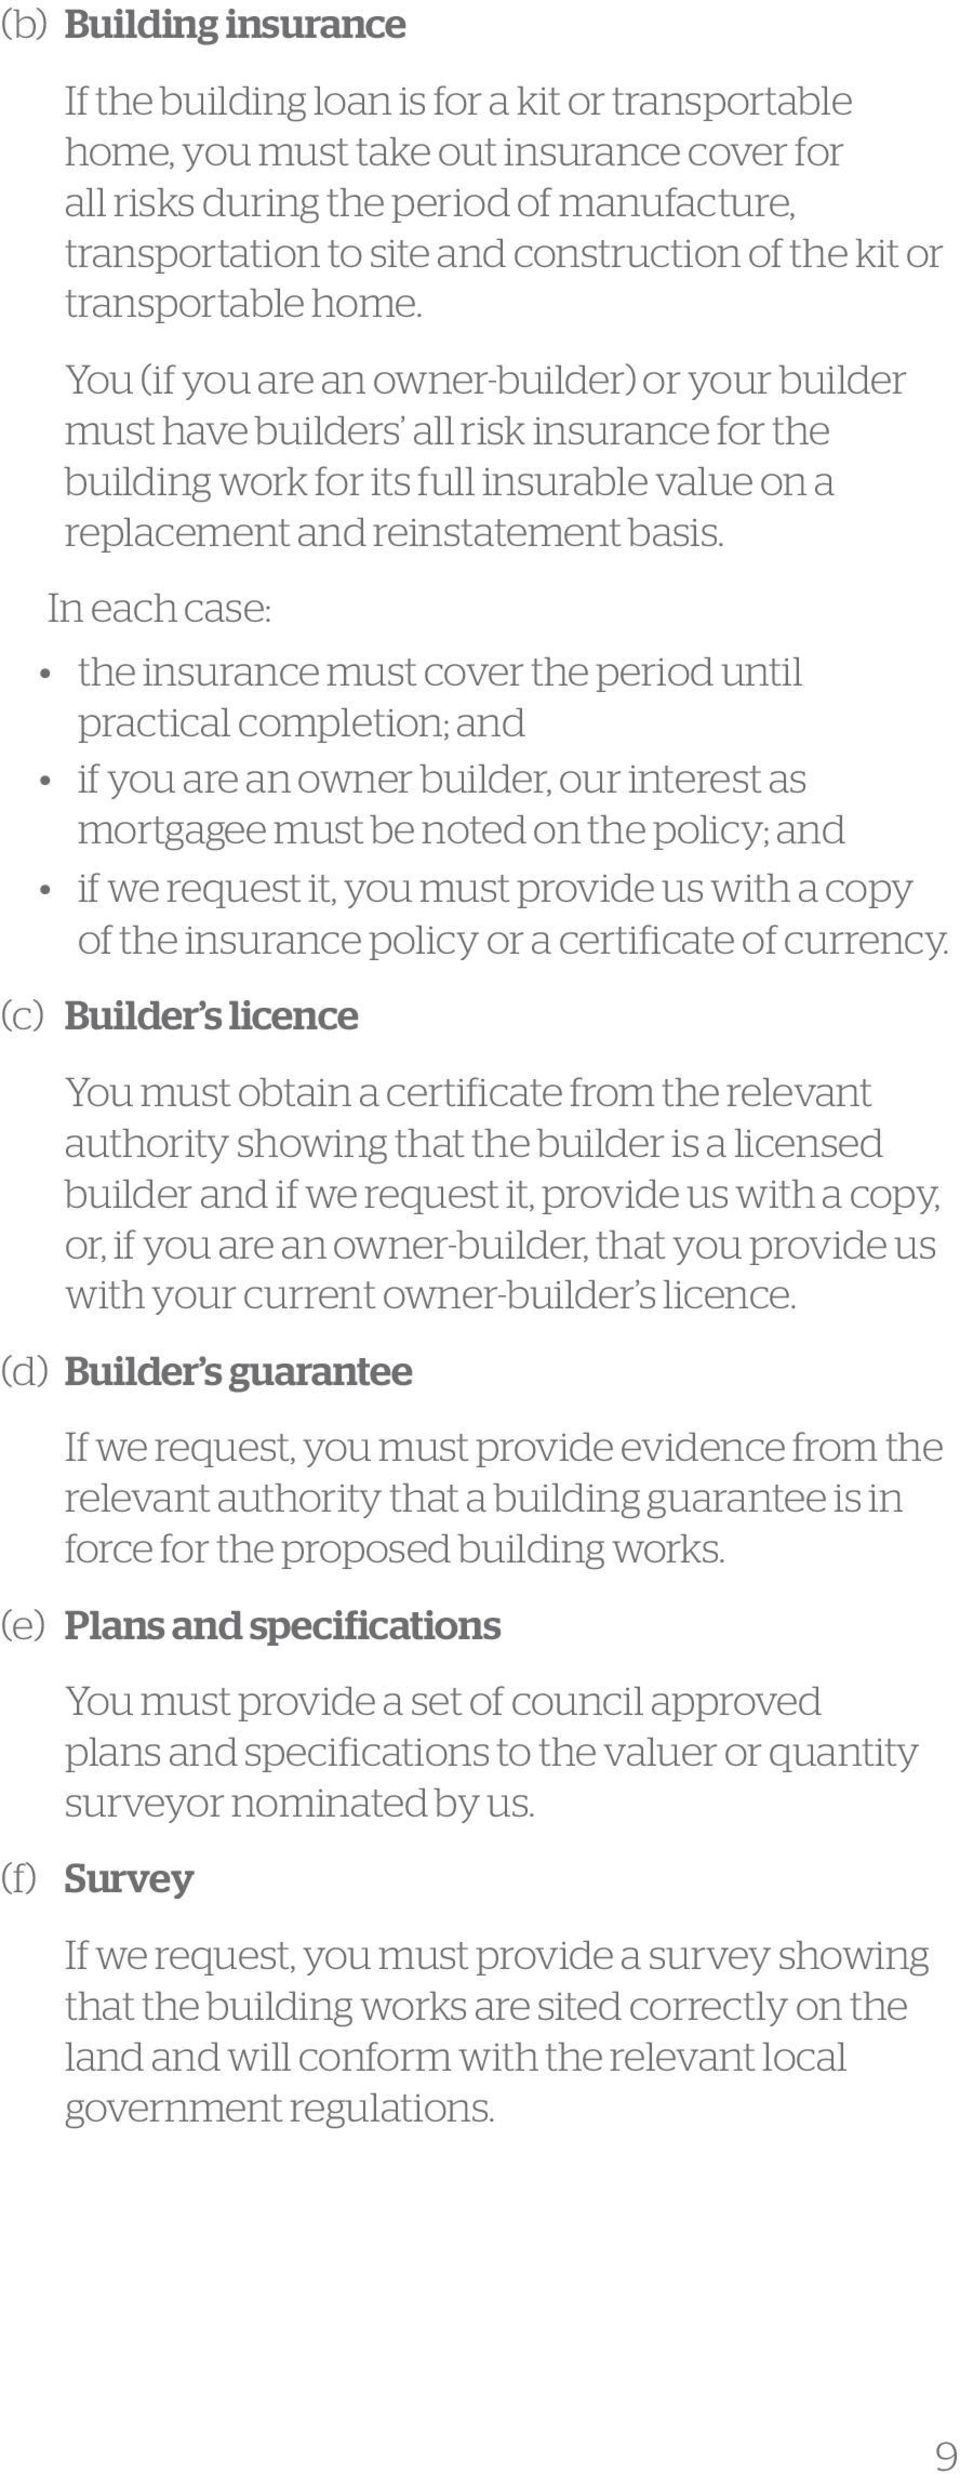 You (if you are an owner-builder) or your builder must have builders all risk insurance for the building work for its full insurable value on a replacement and reinstatement basis.